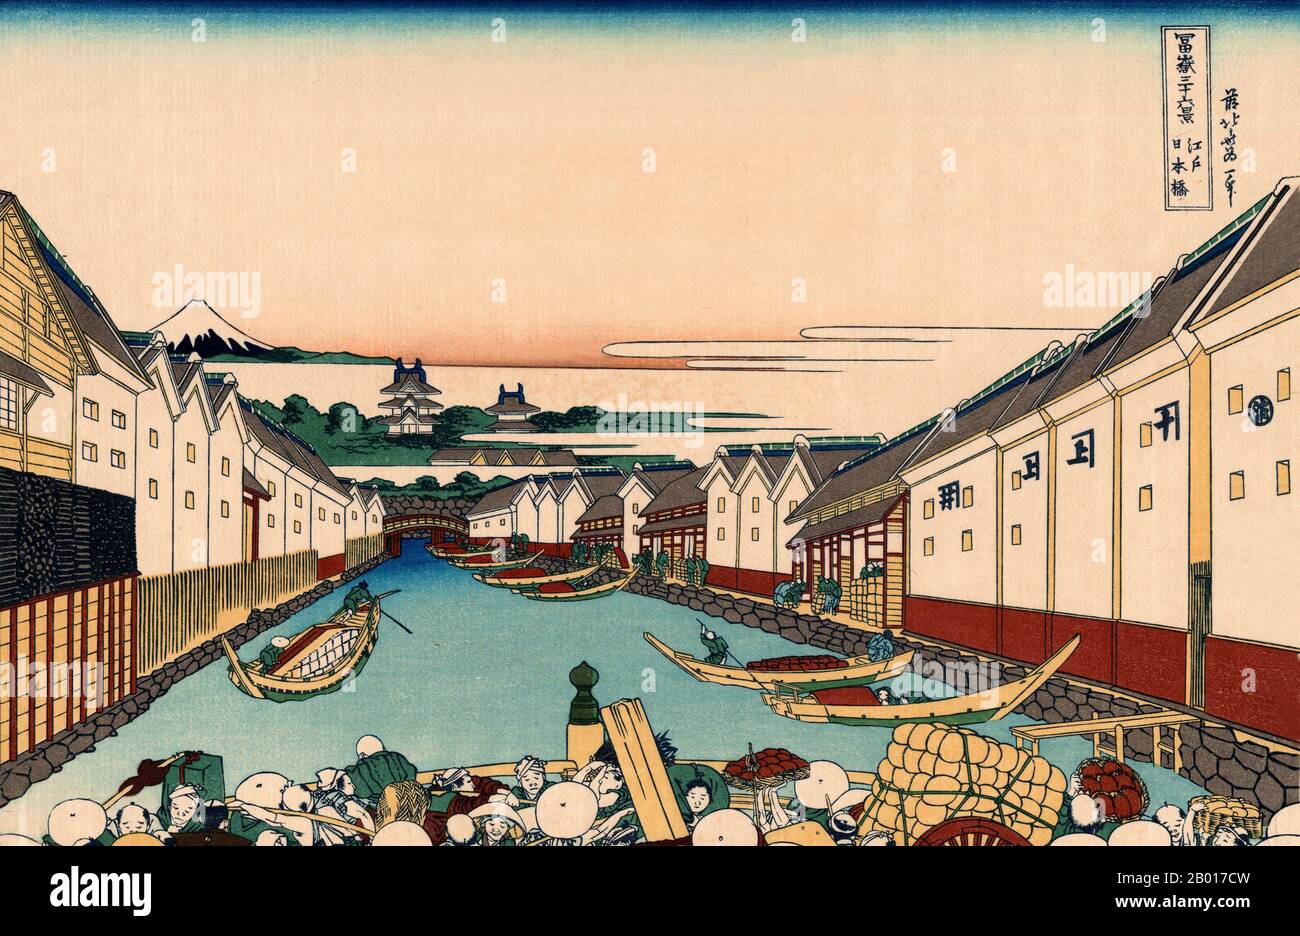 Japan: 'Nihonbashi Bridge in Edo'. Ukiyo-e woodblock print from the series ‘Thirty-Six Views of Mount Fuji’ by Katsushika Hokusai (31 October 1760 - 10 May 1849), 1830.  ‘Thirty-six Views of Mount Fuji’ is an ‘ukiyo-e’ series of woodcut prints by Japanese artist Katsushika Hokusai. The series depicts Mount Fuji in differing seasons and weather conditions from a variety of places and distances. It actually consists of 46 prints created between 1826 and 1833. The first 36 were included in the original publication and, due to their popularity, 10 more were added after the original publication. Stock Photo